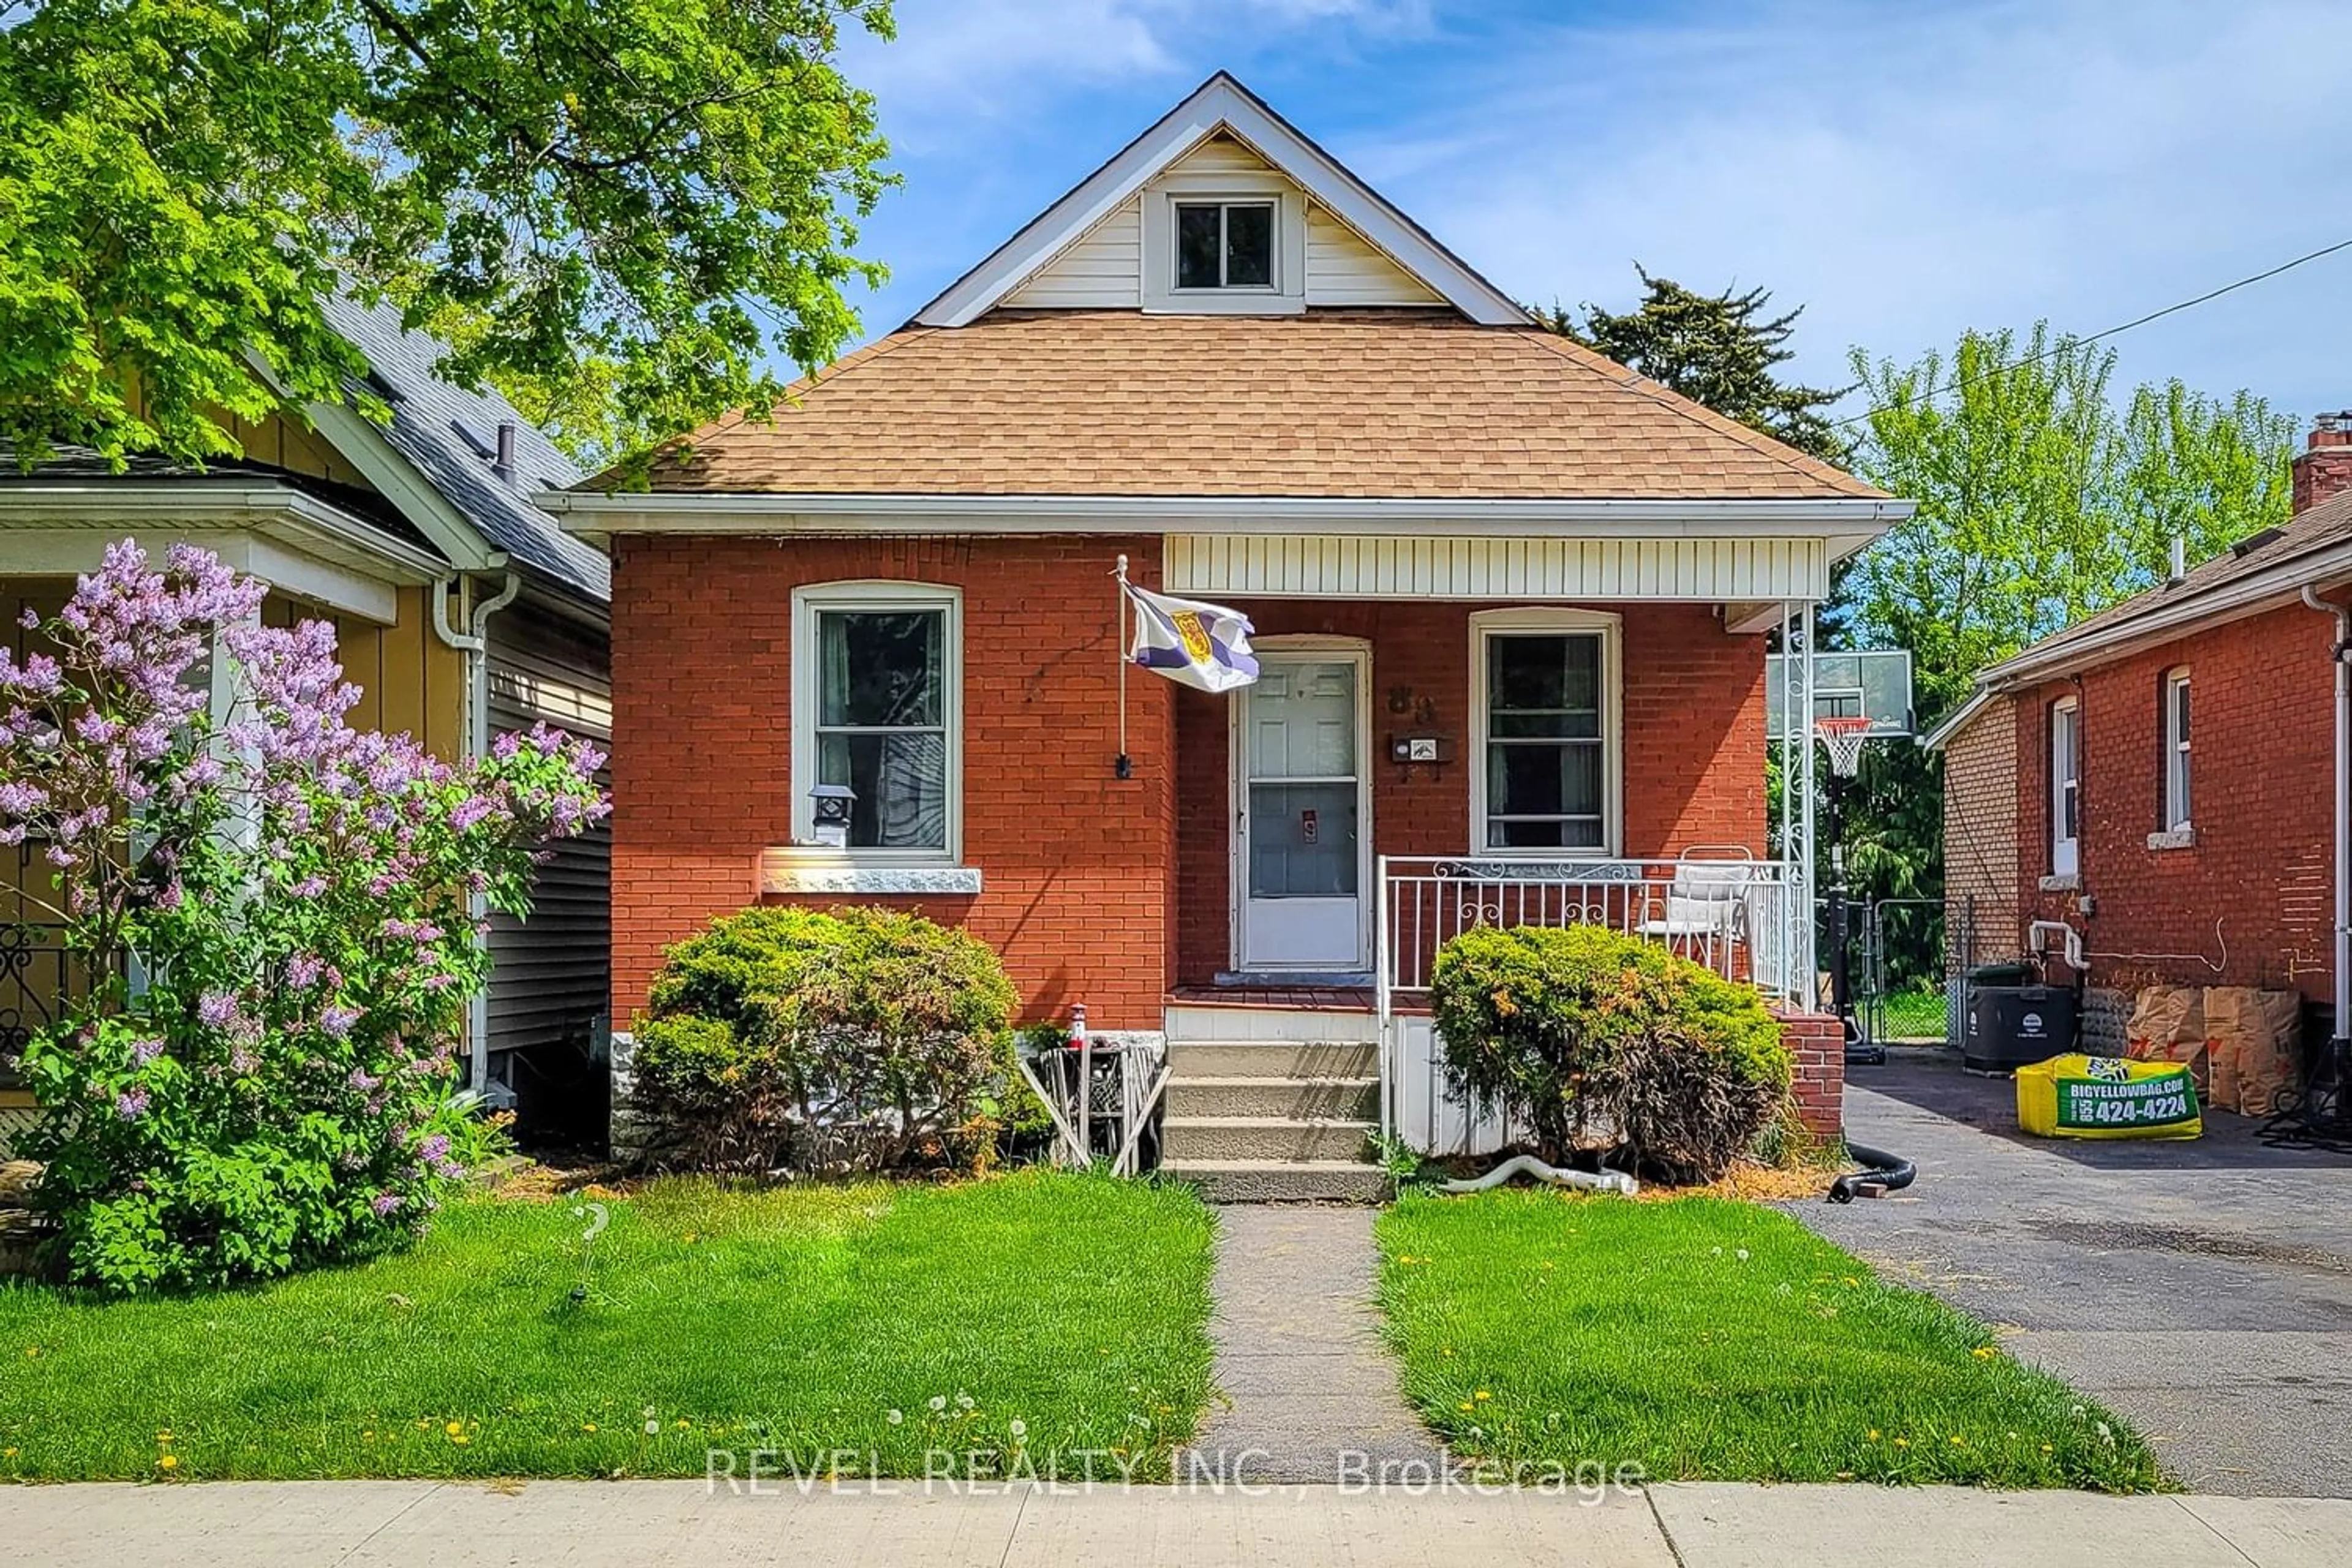 Home with brick exterior material for 88 Garside Ave, Hamilton Ontario L8H 4W3